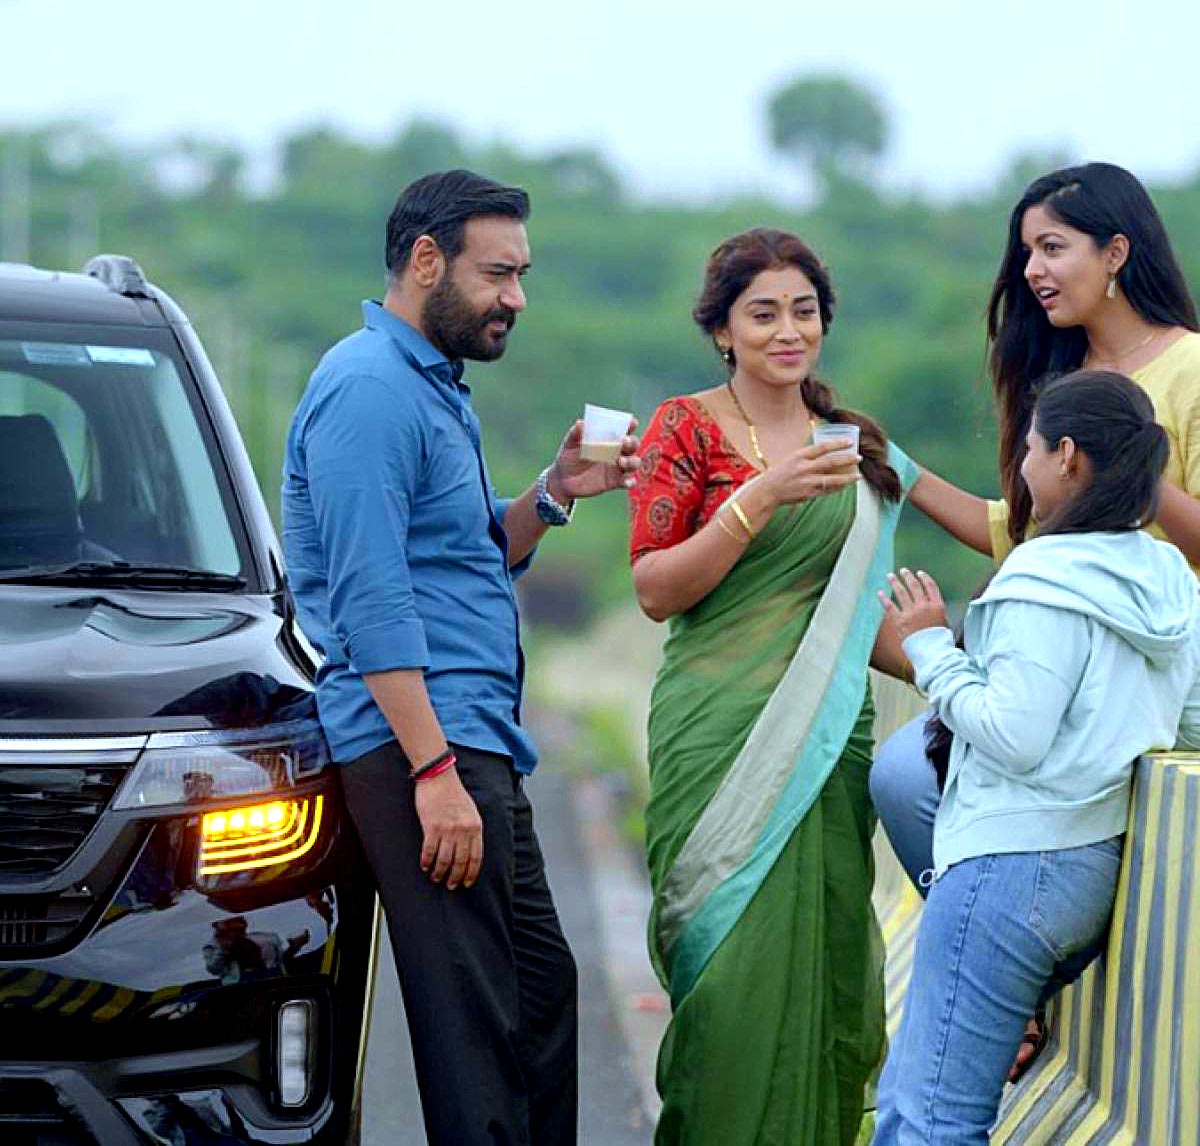 Bollywood Star Ajay Devgn starrer holds strong on weekdays; Crosses Rs 100 crore within 1 week : Drishyam 2 Box Office